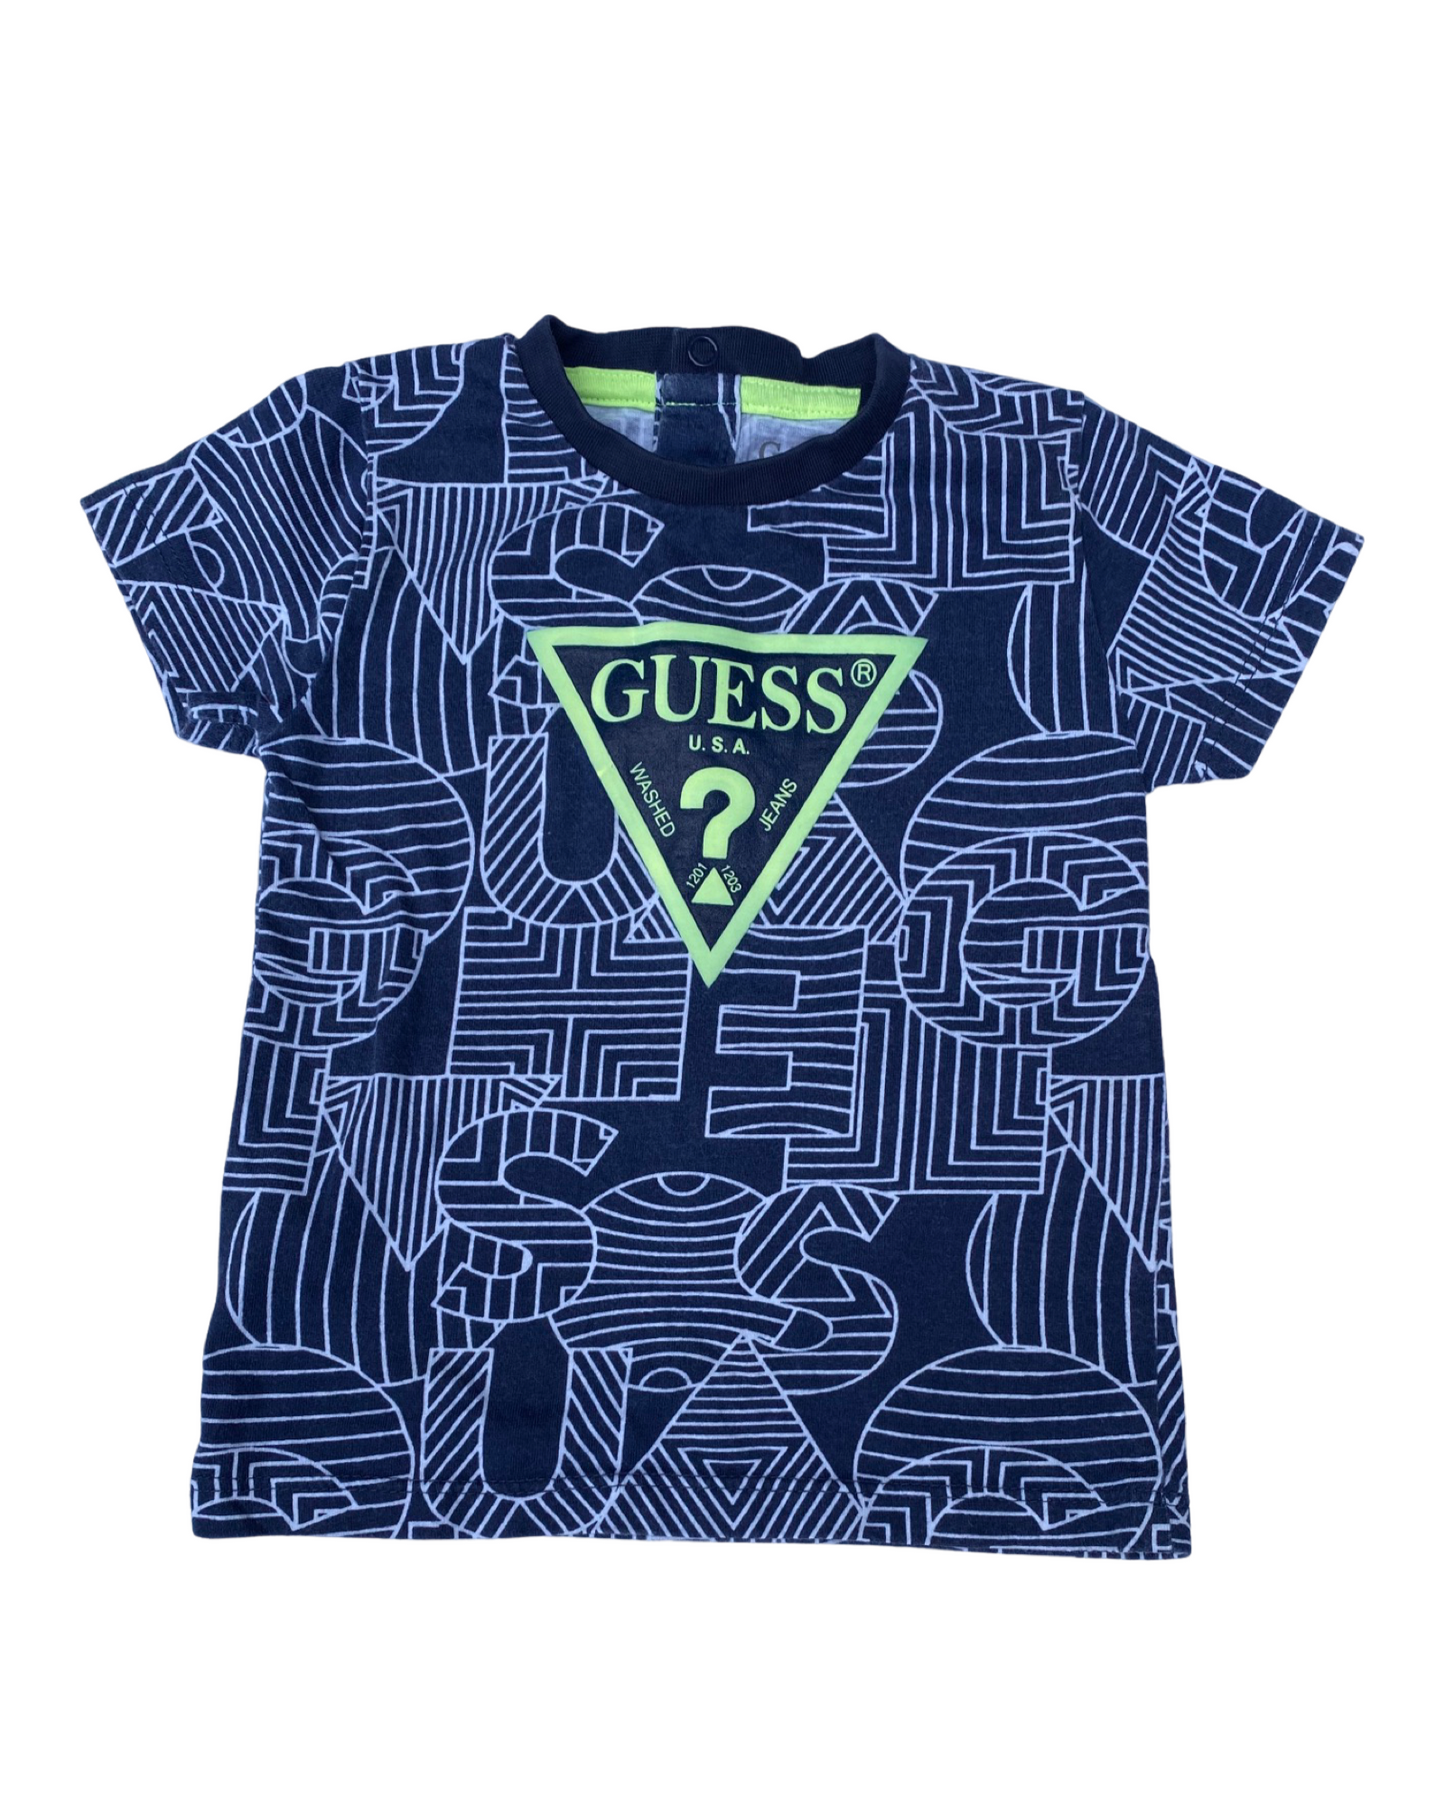 Guess vintage printed triangle logo t shirt (size 9-12mths)